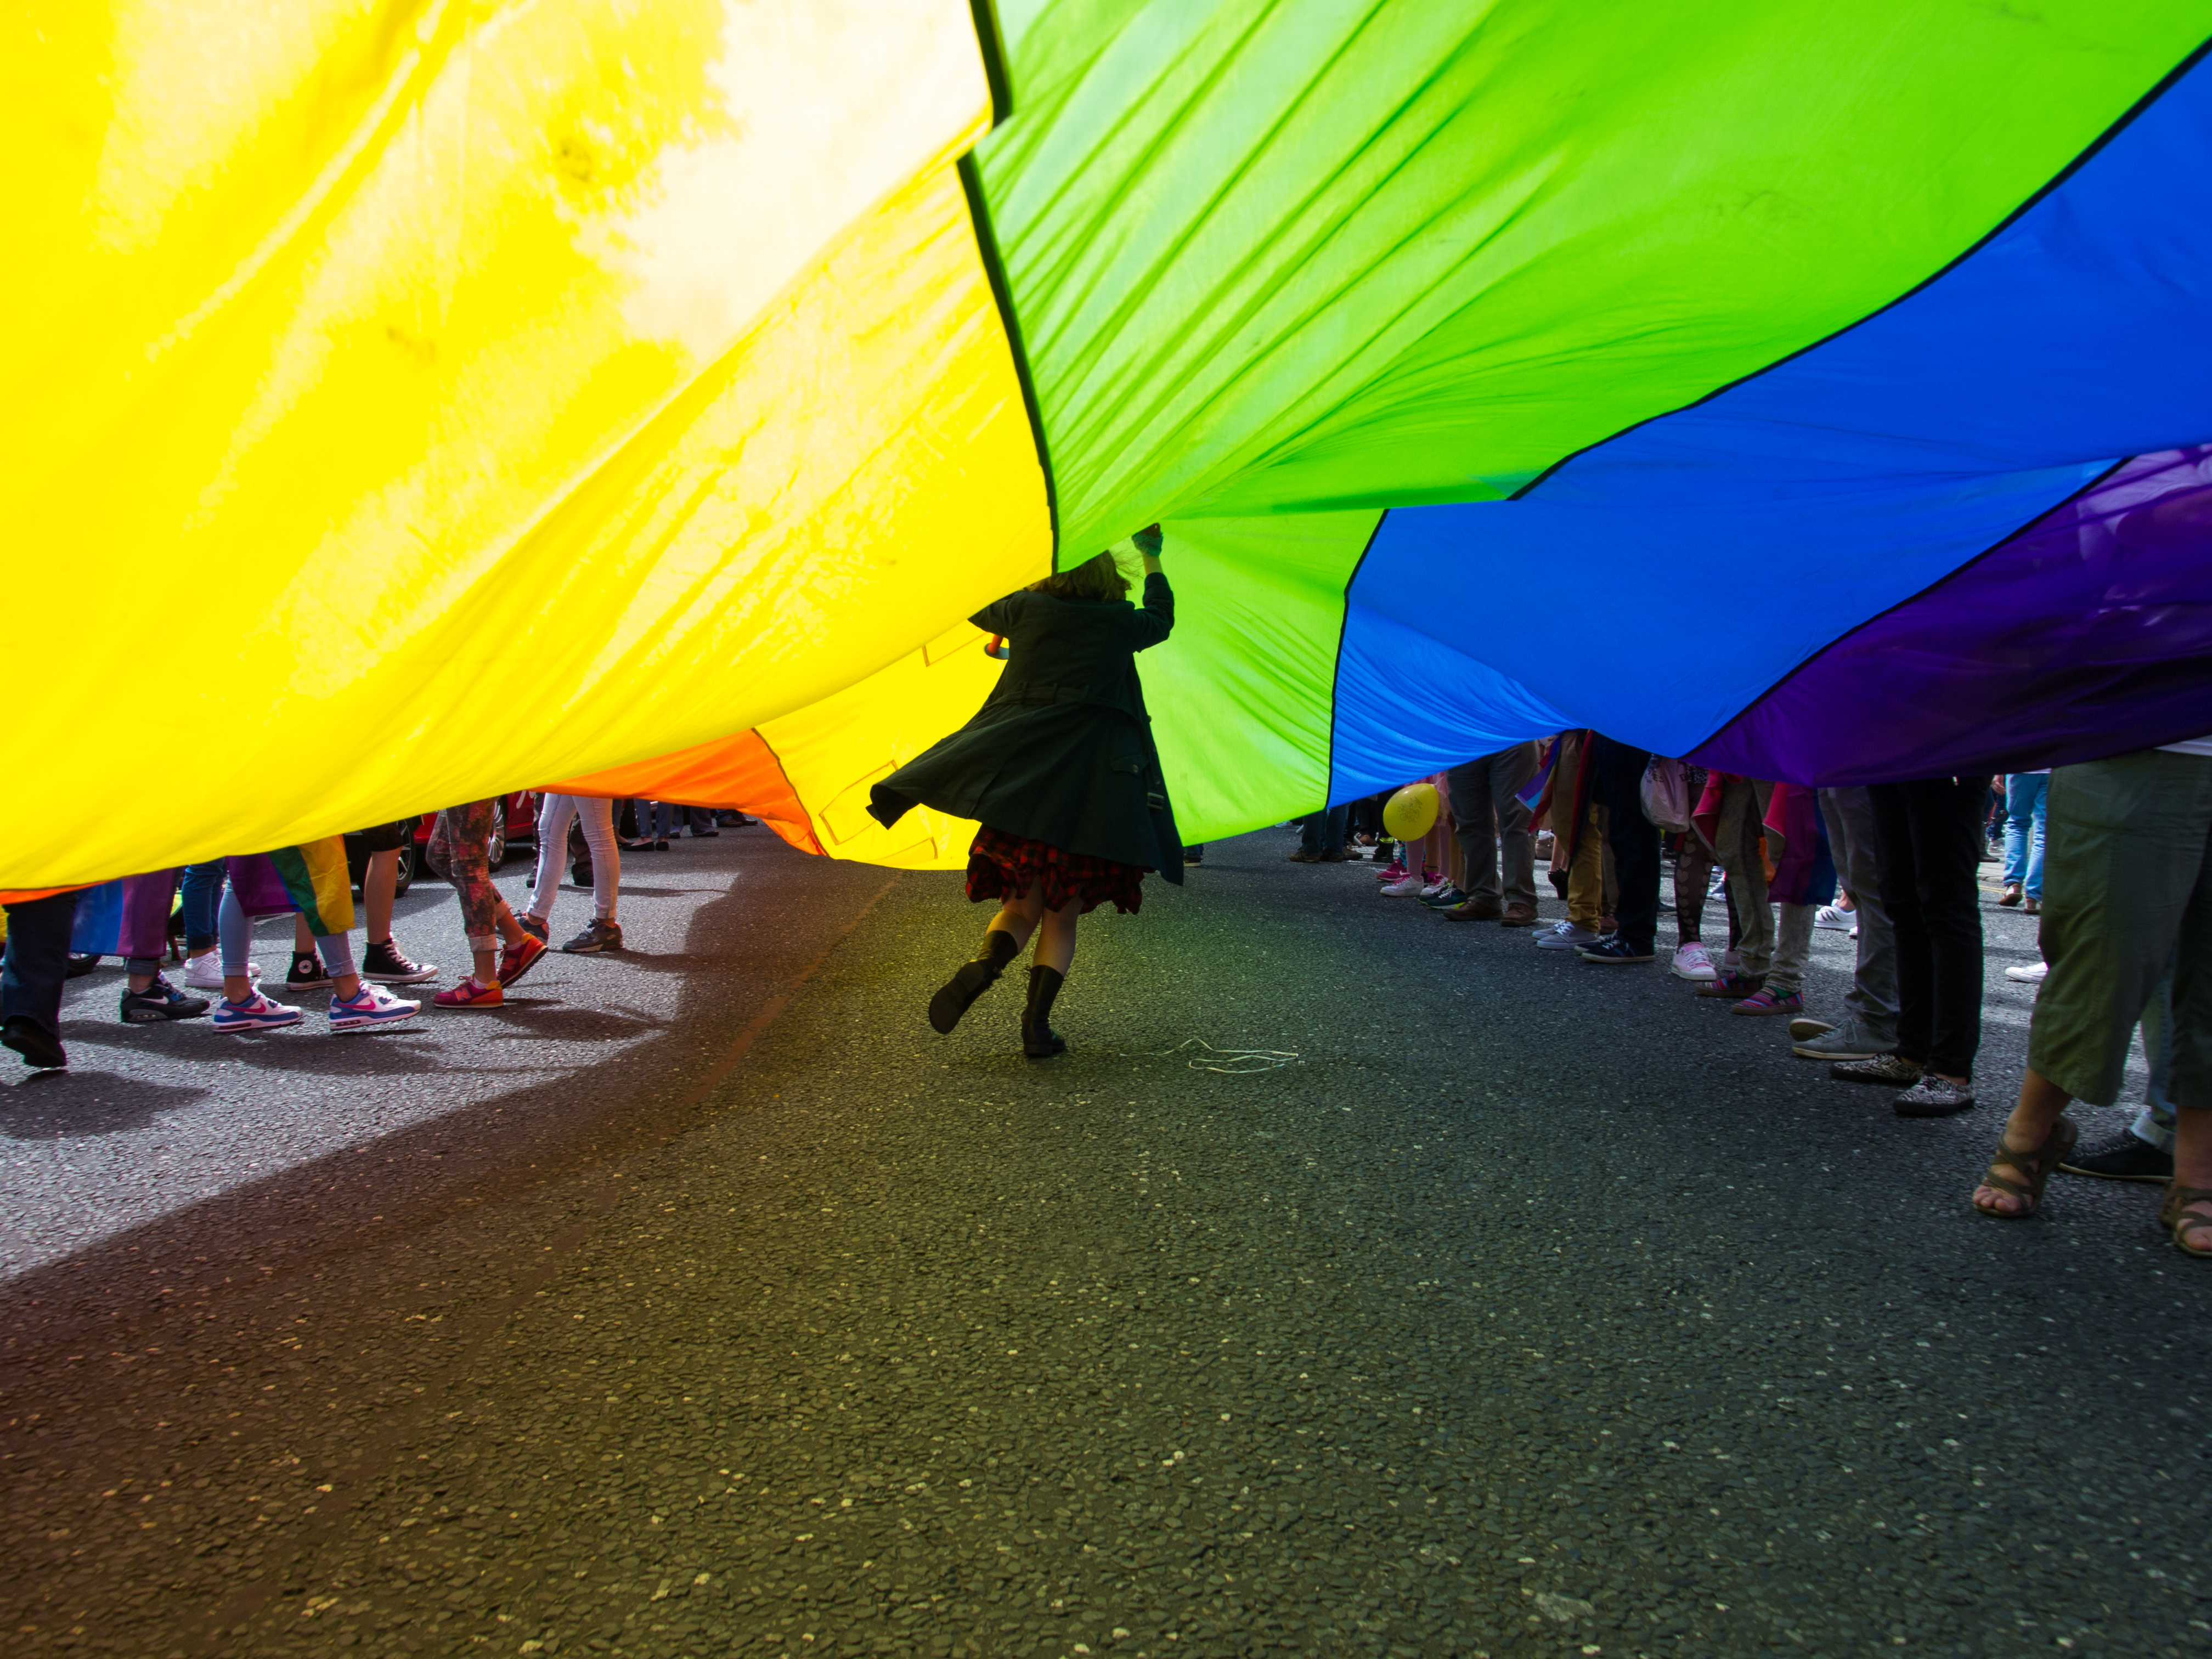 File:Supporting the Pride flag.jpg - Wikimedia Commons